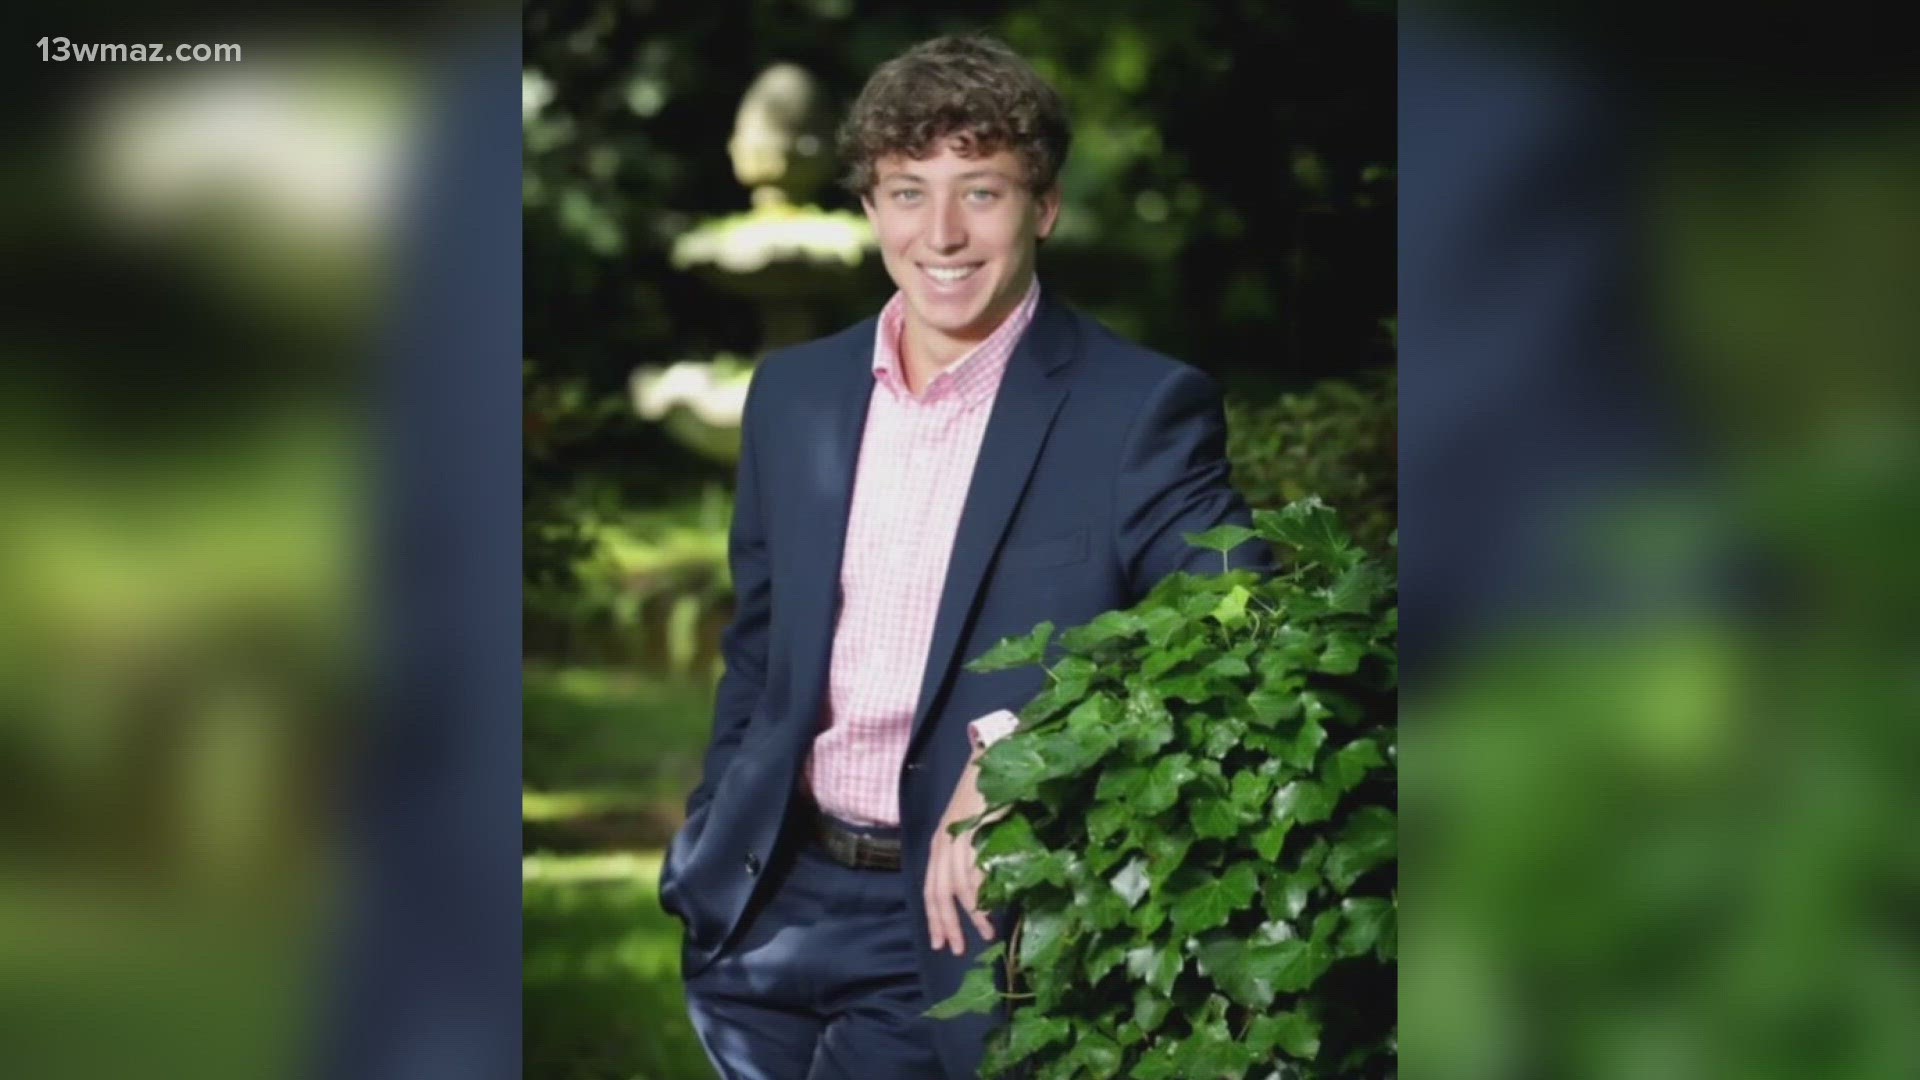 January for Jack | Stratford's mental health initiatives raise $3,000 to honor former classmate